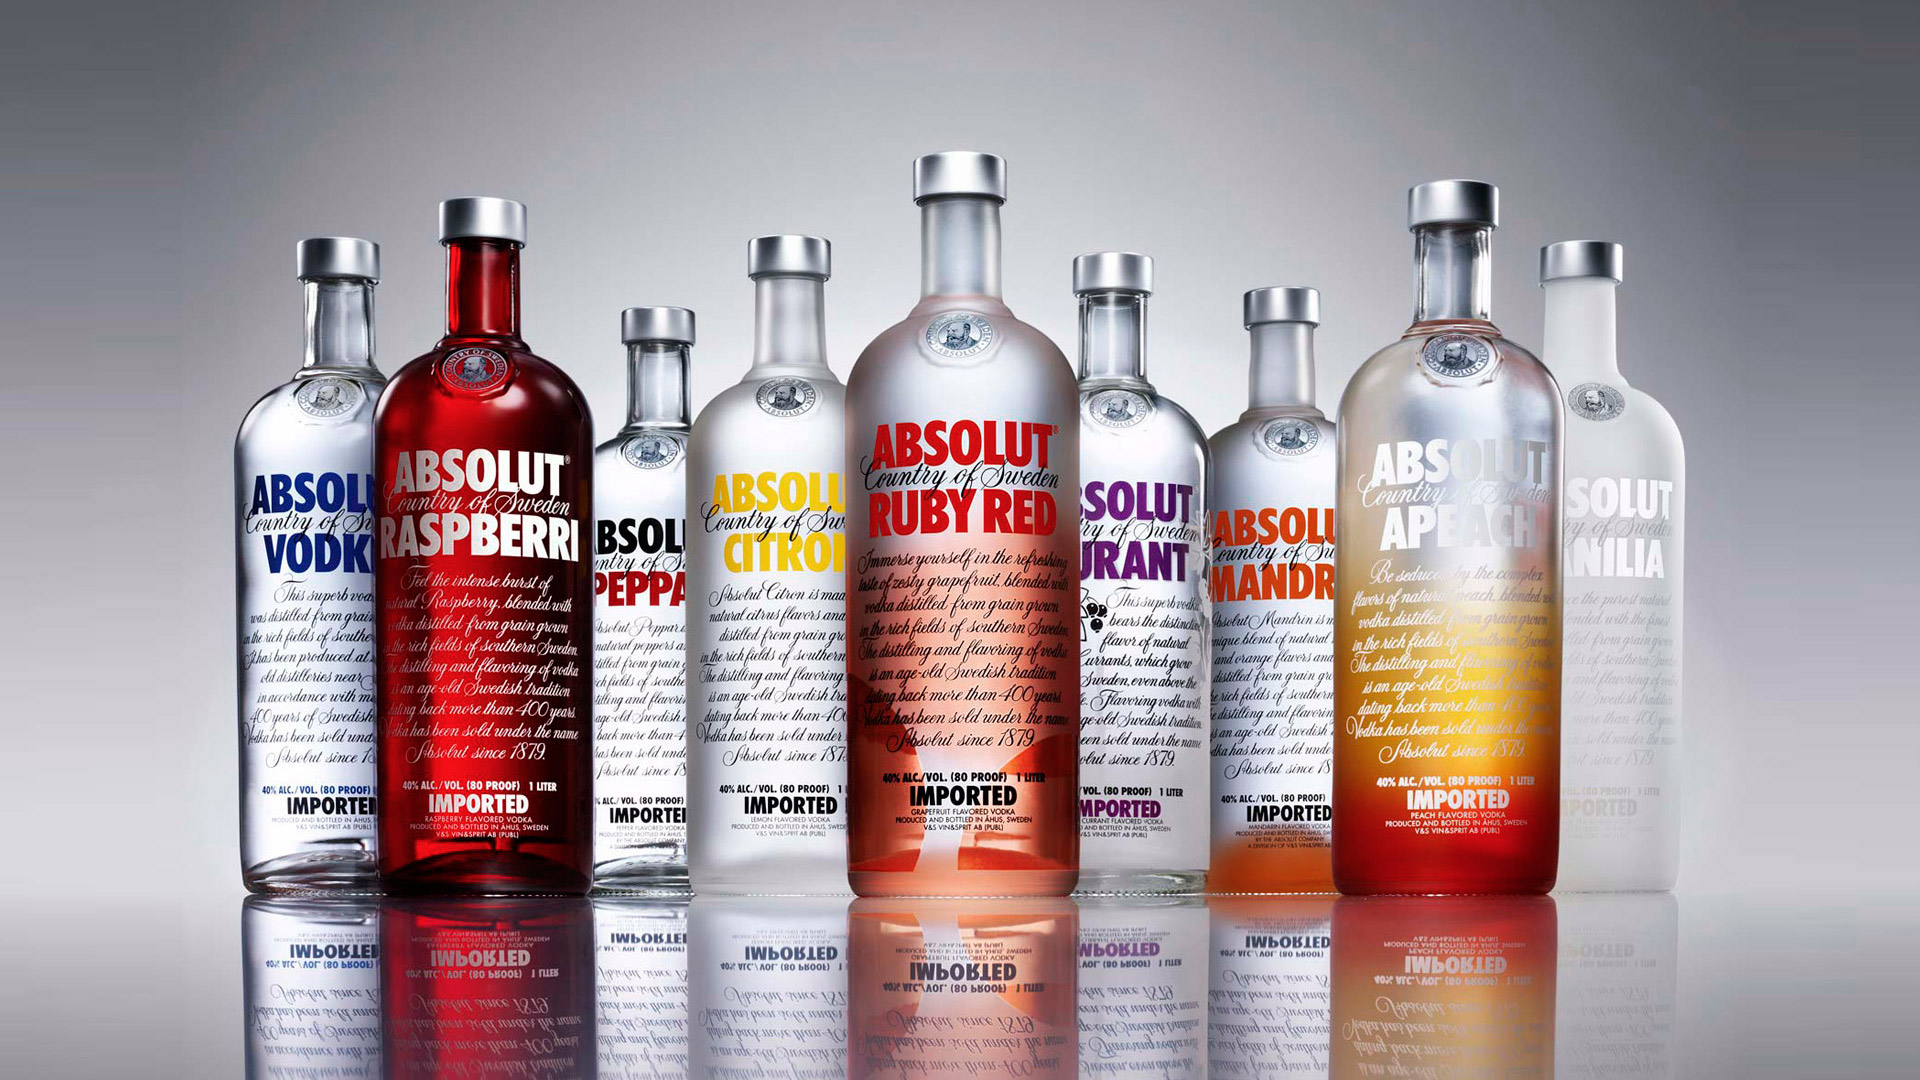 Products Absolut HD Wallpaper | Background Image